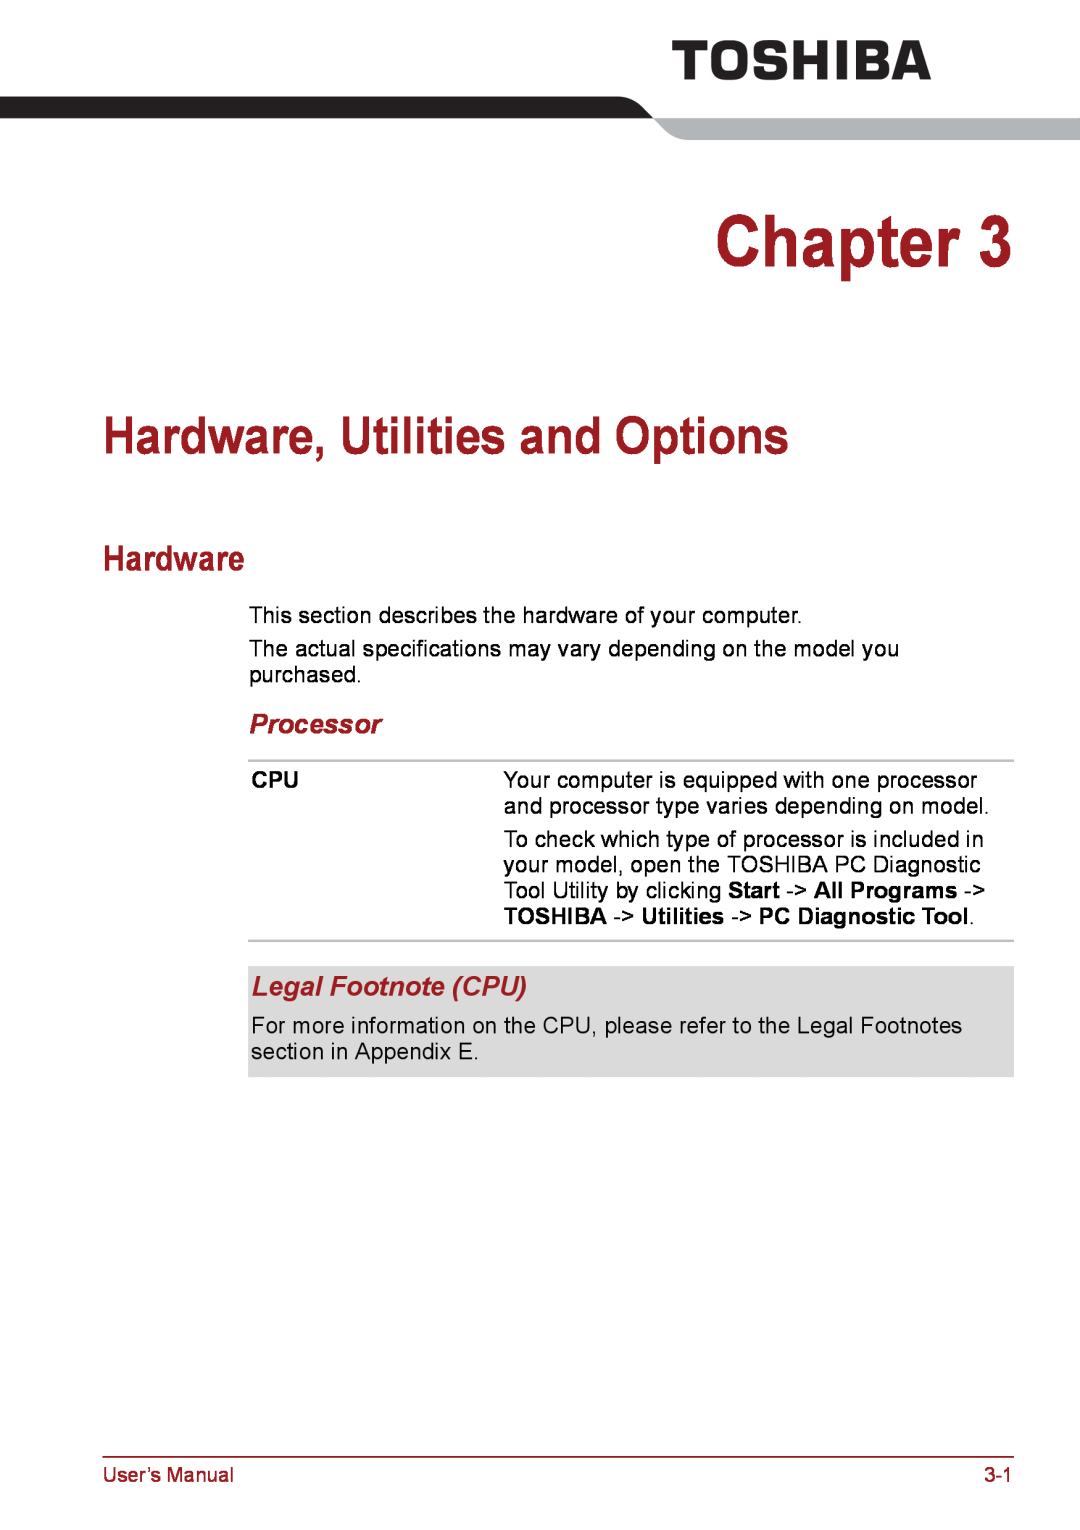 Toshiba PSC08U-02D01D user manual Hardware, Utilities and Options, Processor, Legal Footnote CPU, Chapter 